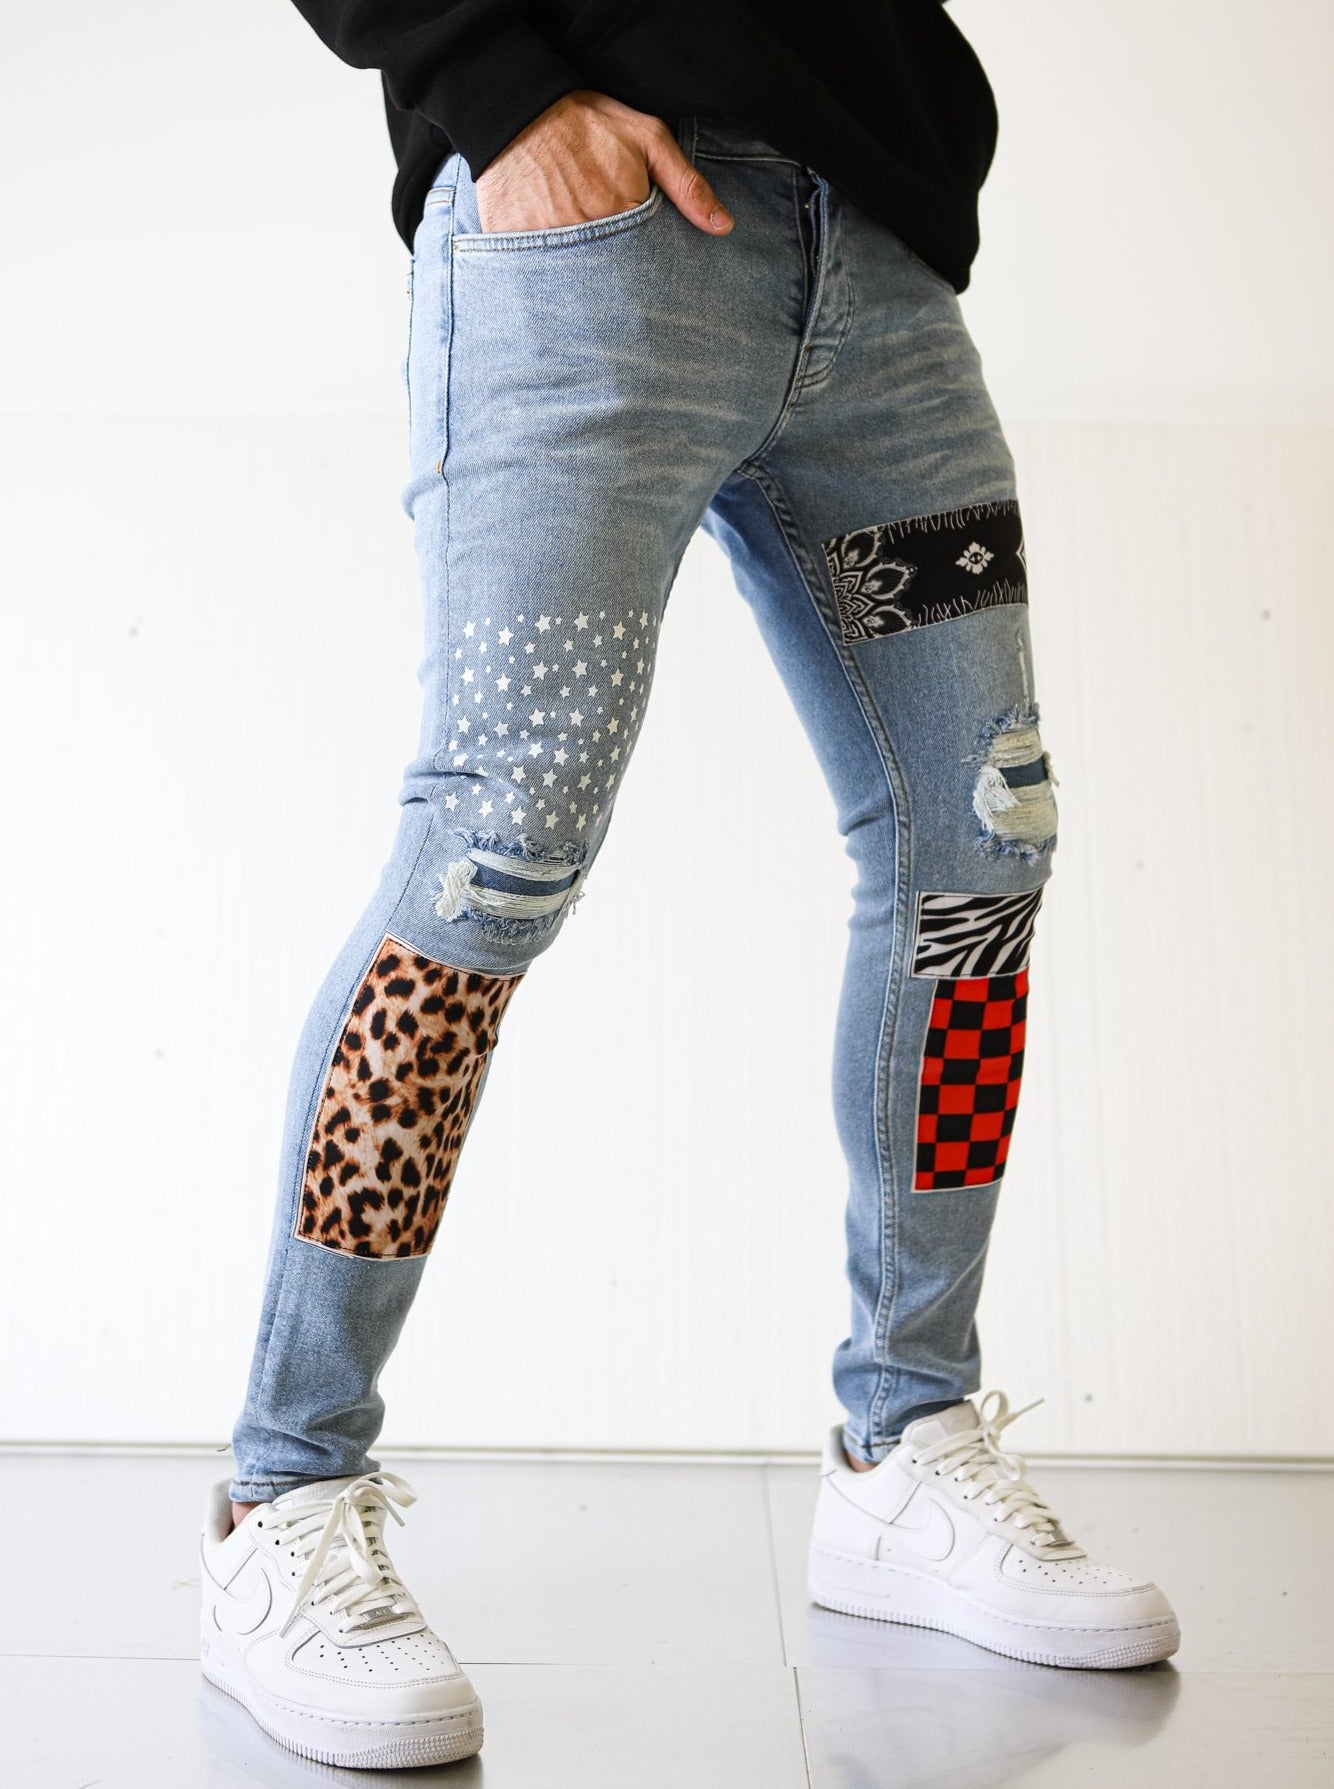 Patched Printed Blue Jeans - UNEFFECTED STUDIOS® - JEANS - UNEFFECTED